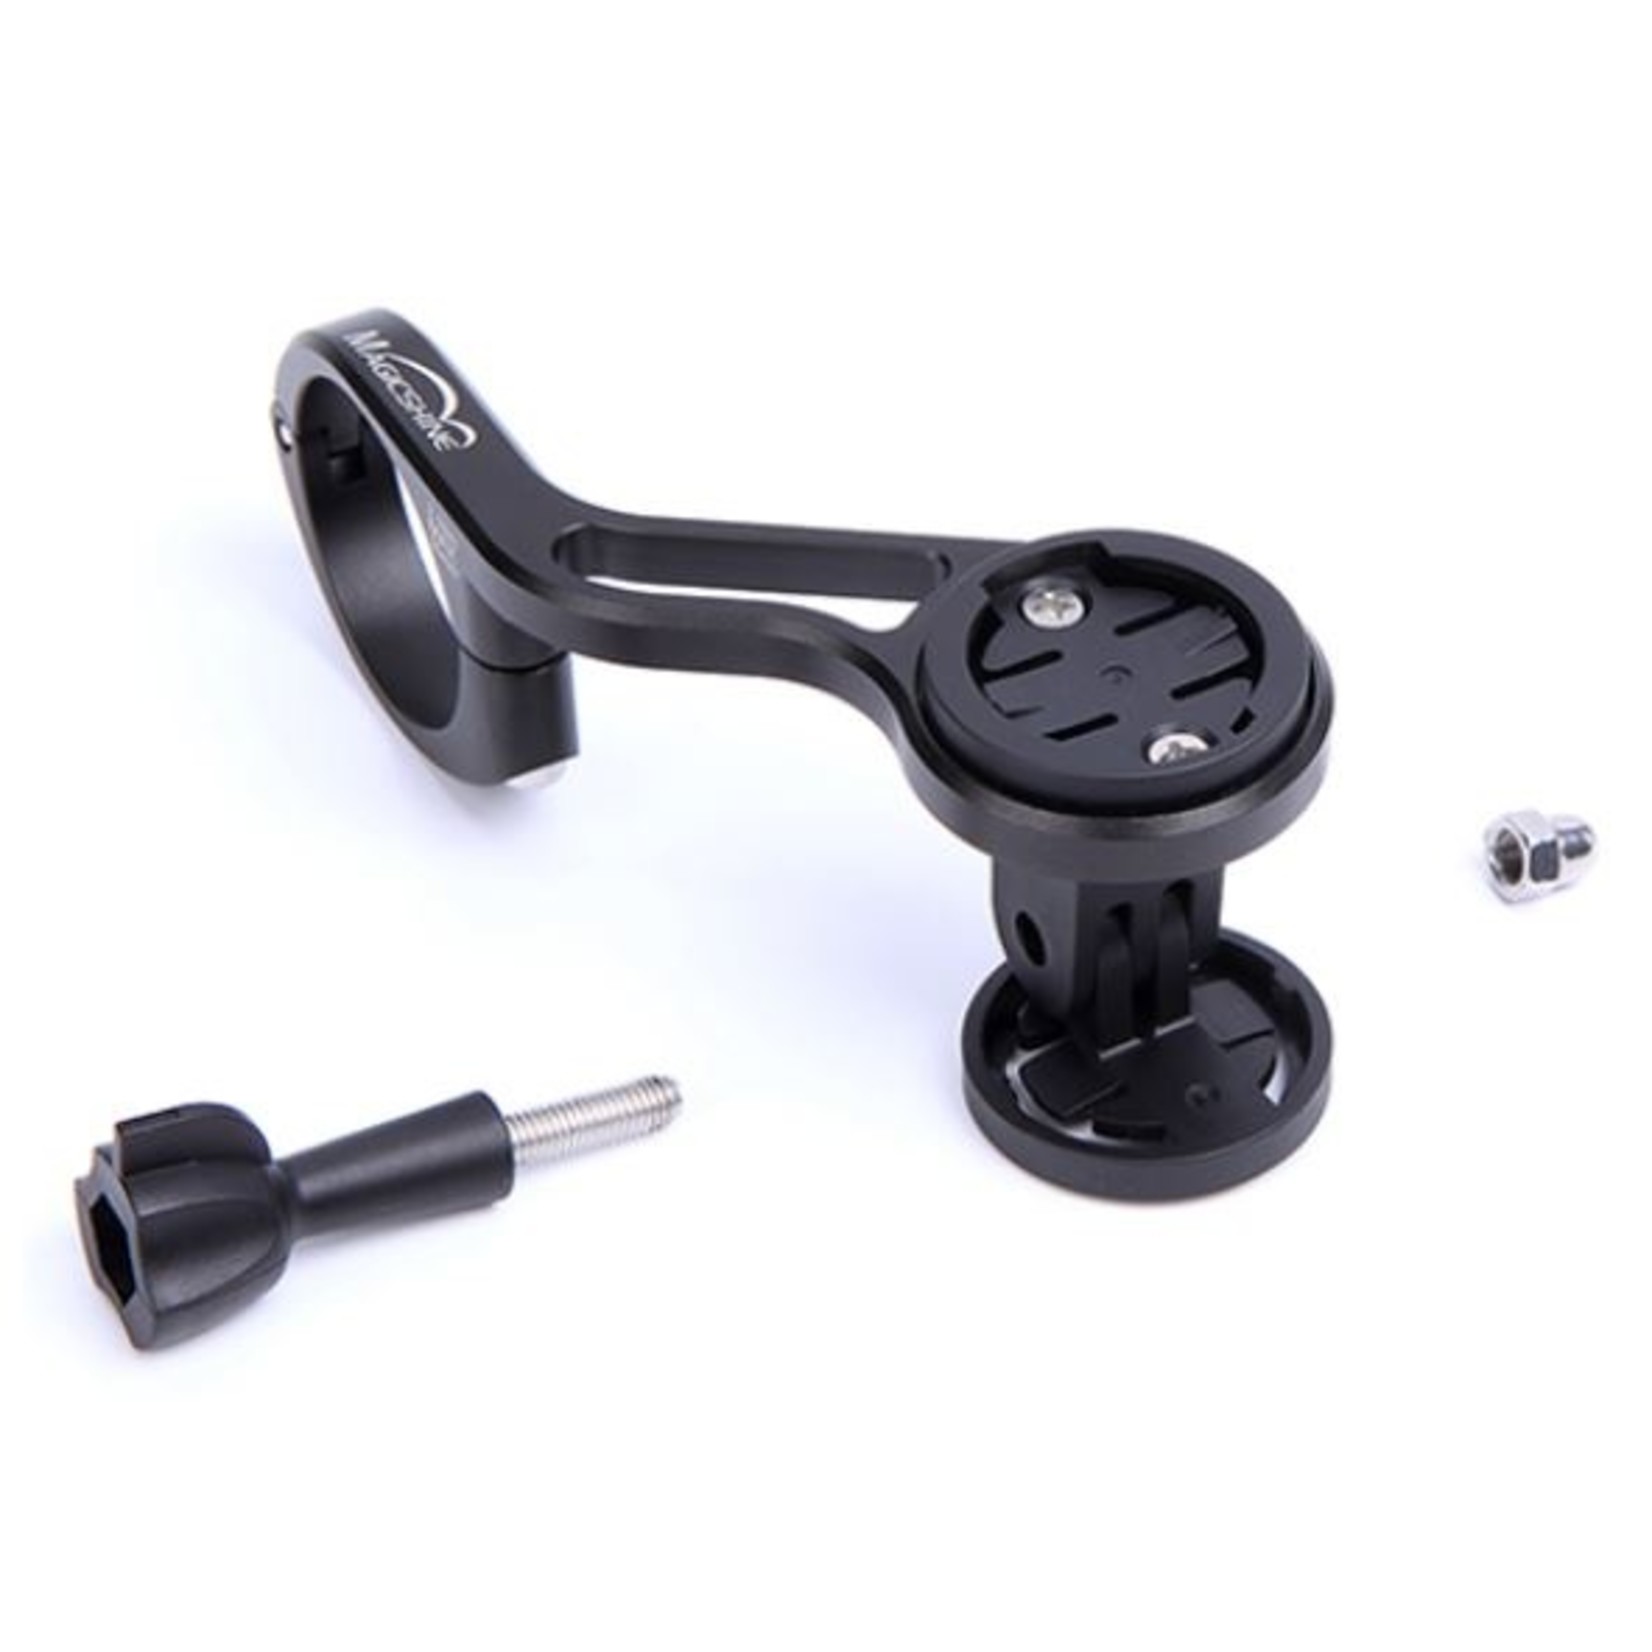 Out Front Magicshine Light Mount - TTA Front Handle Bar Mount For Allty Series / Wahoo / Garmin / Gopro